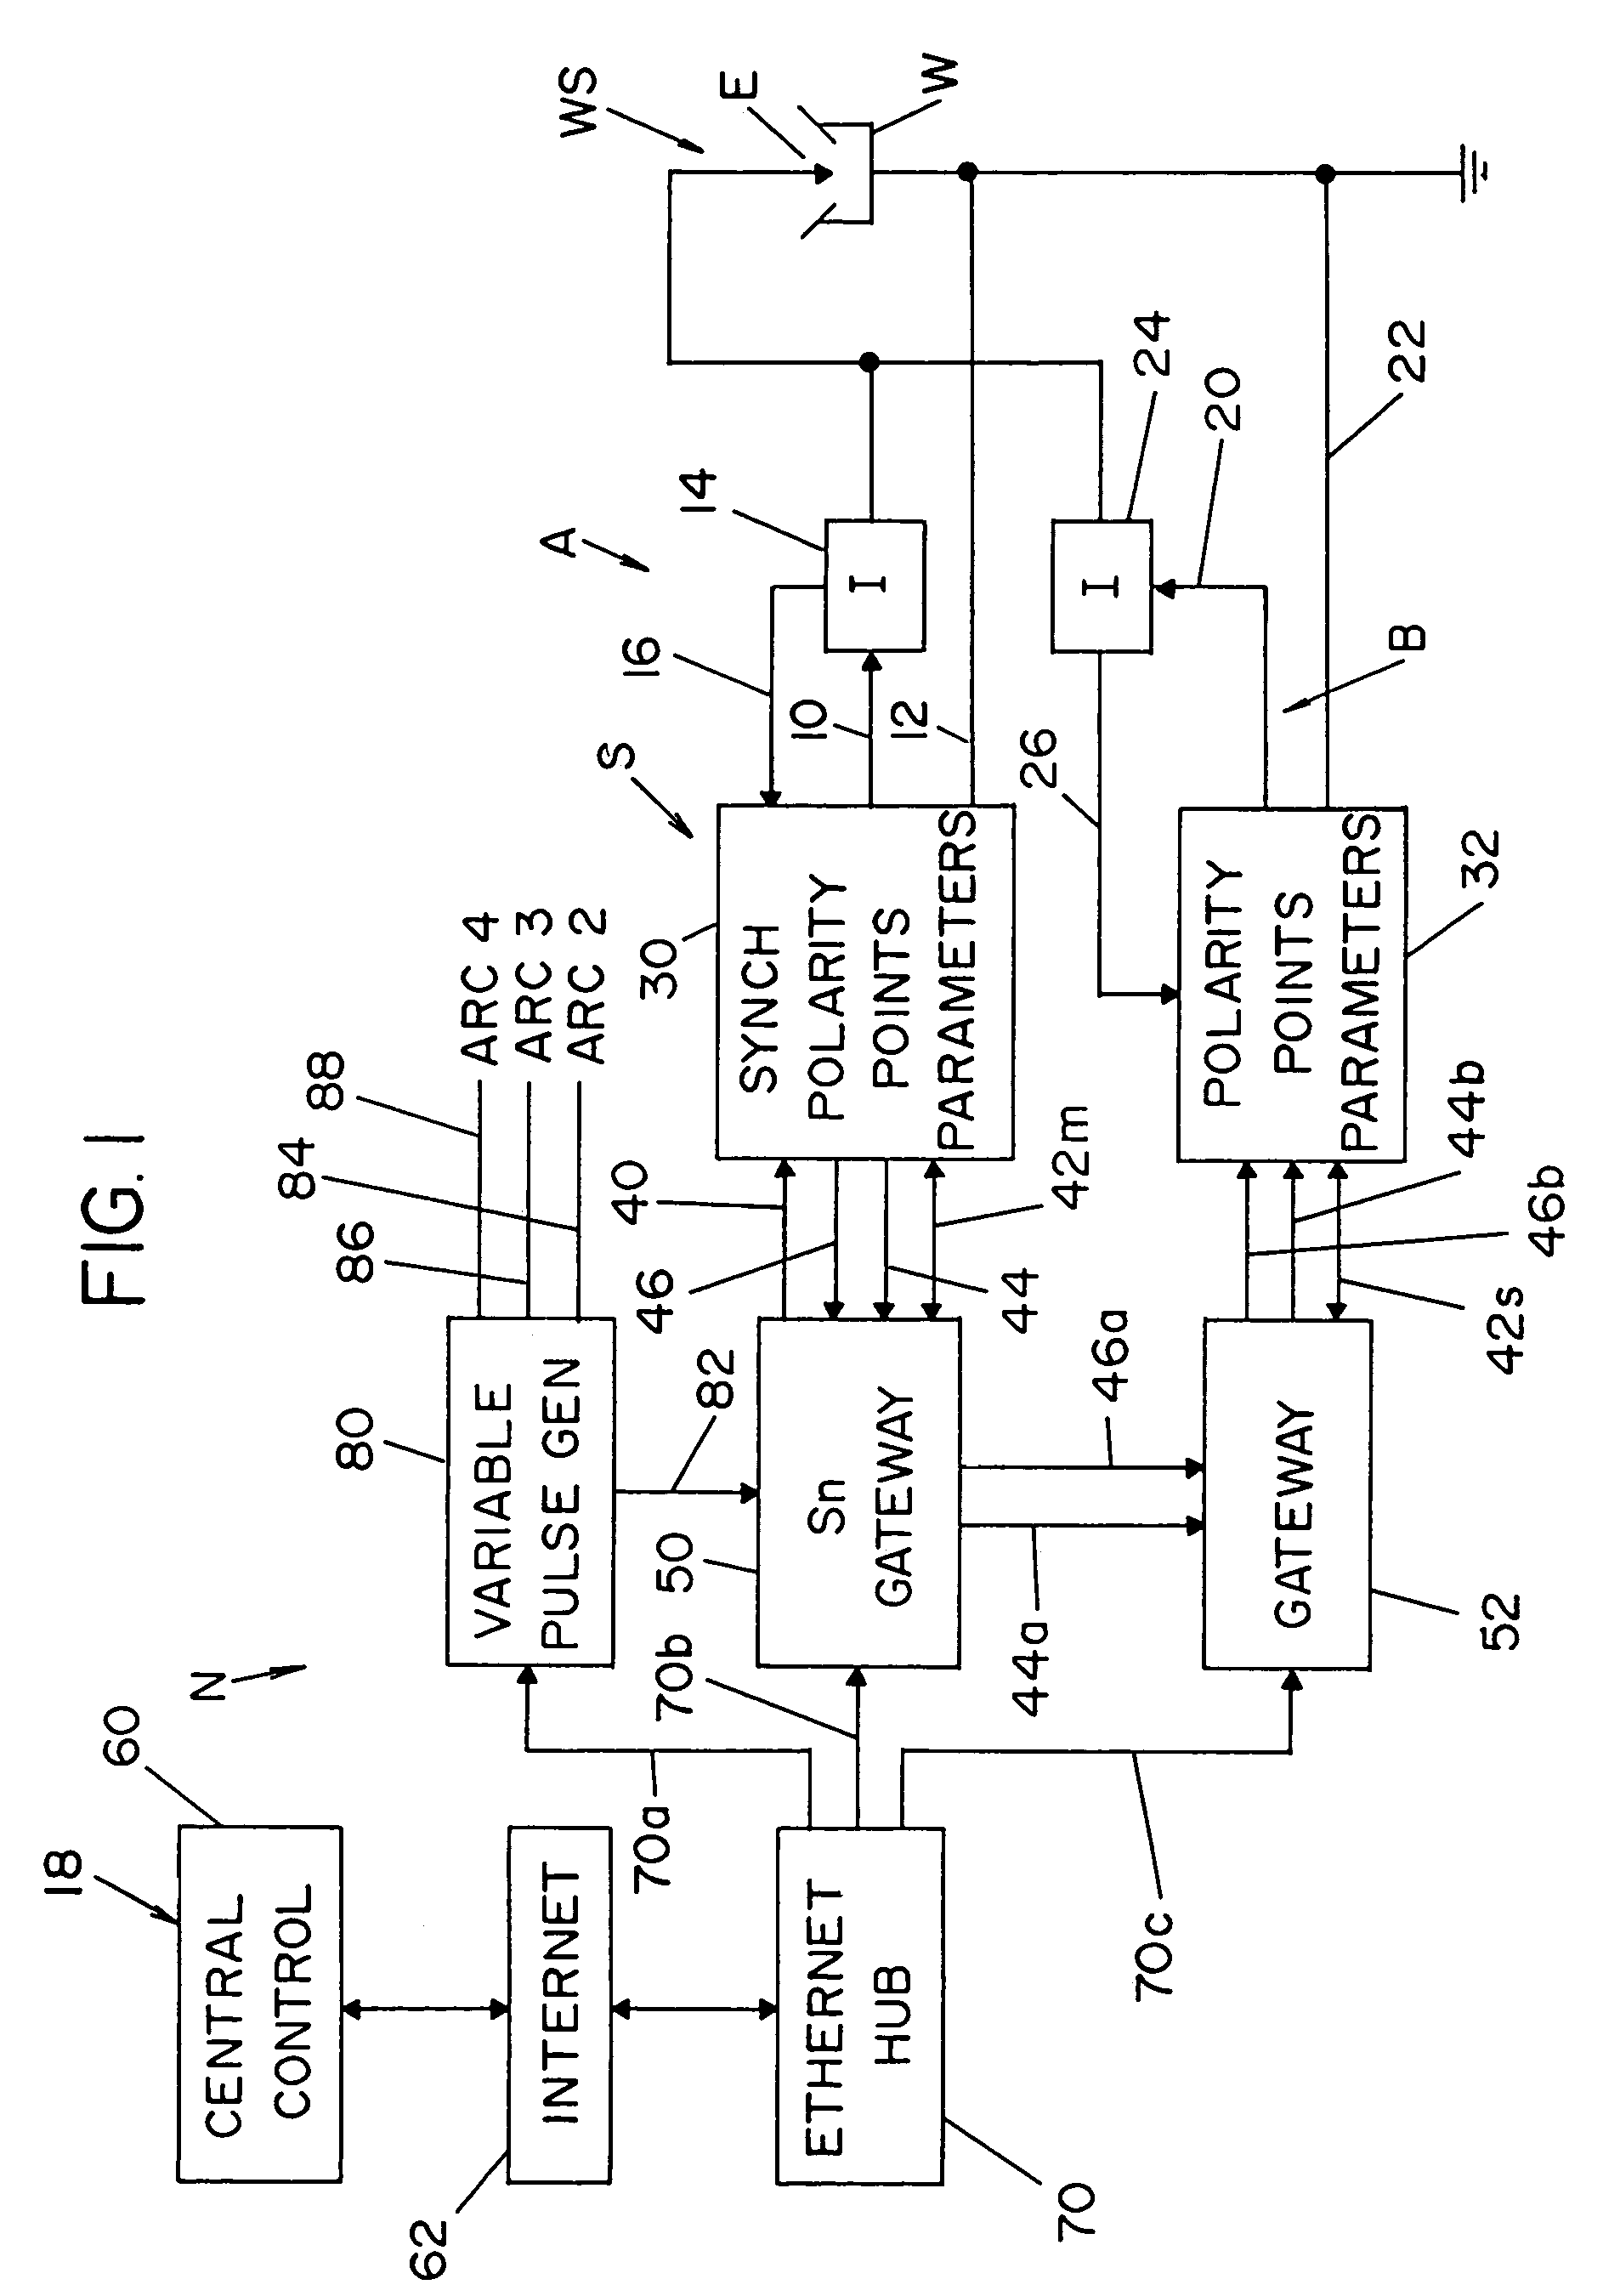 Electric arc welder system with waveform profile control